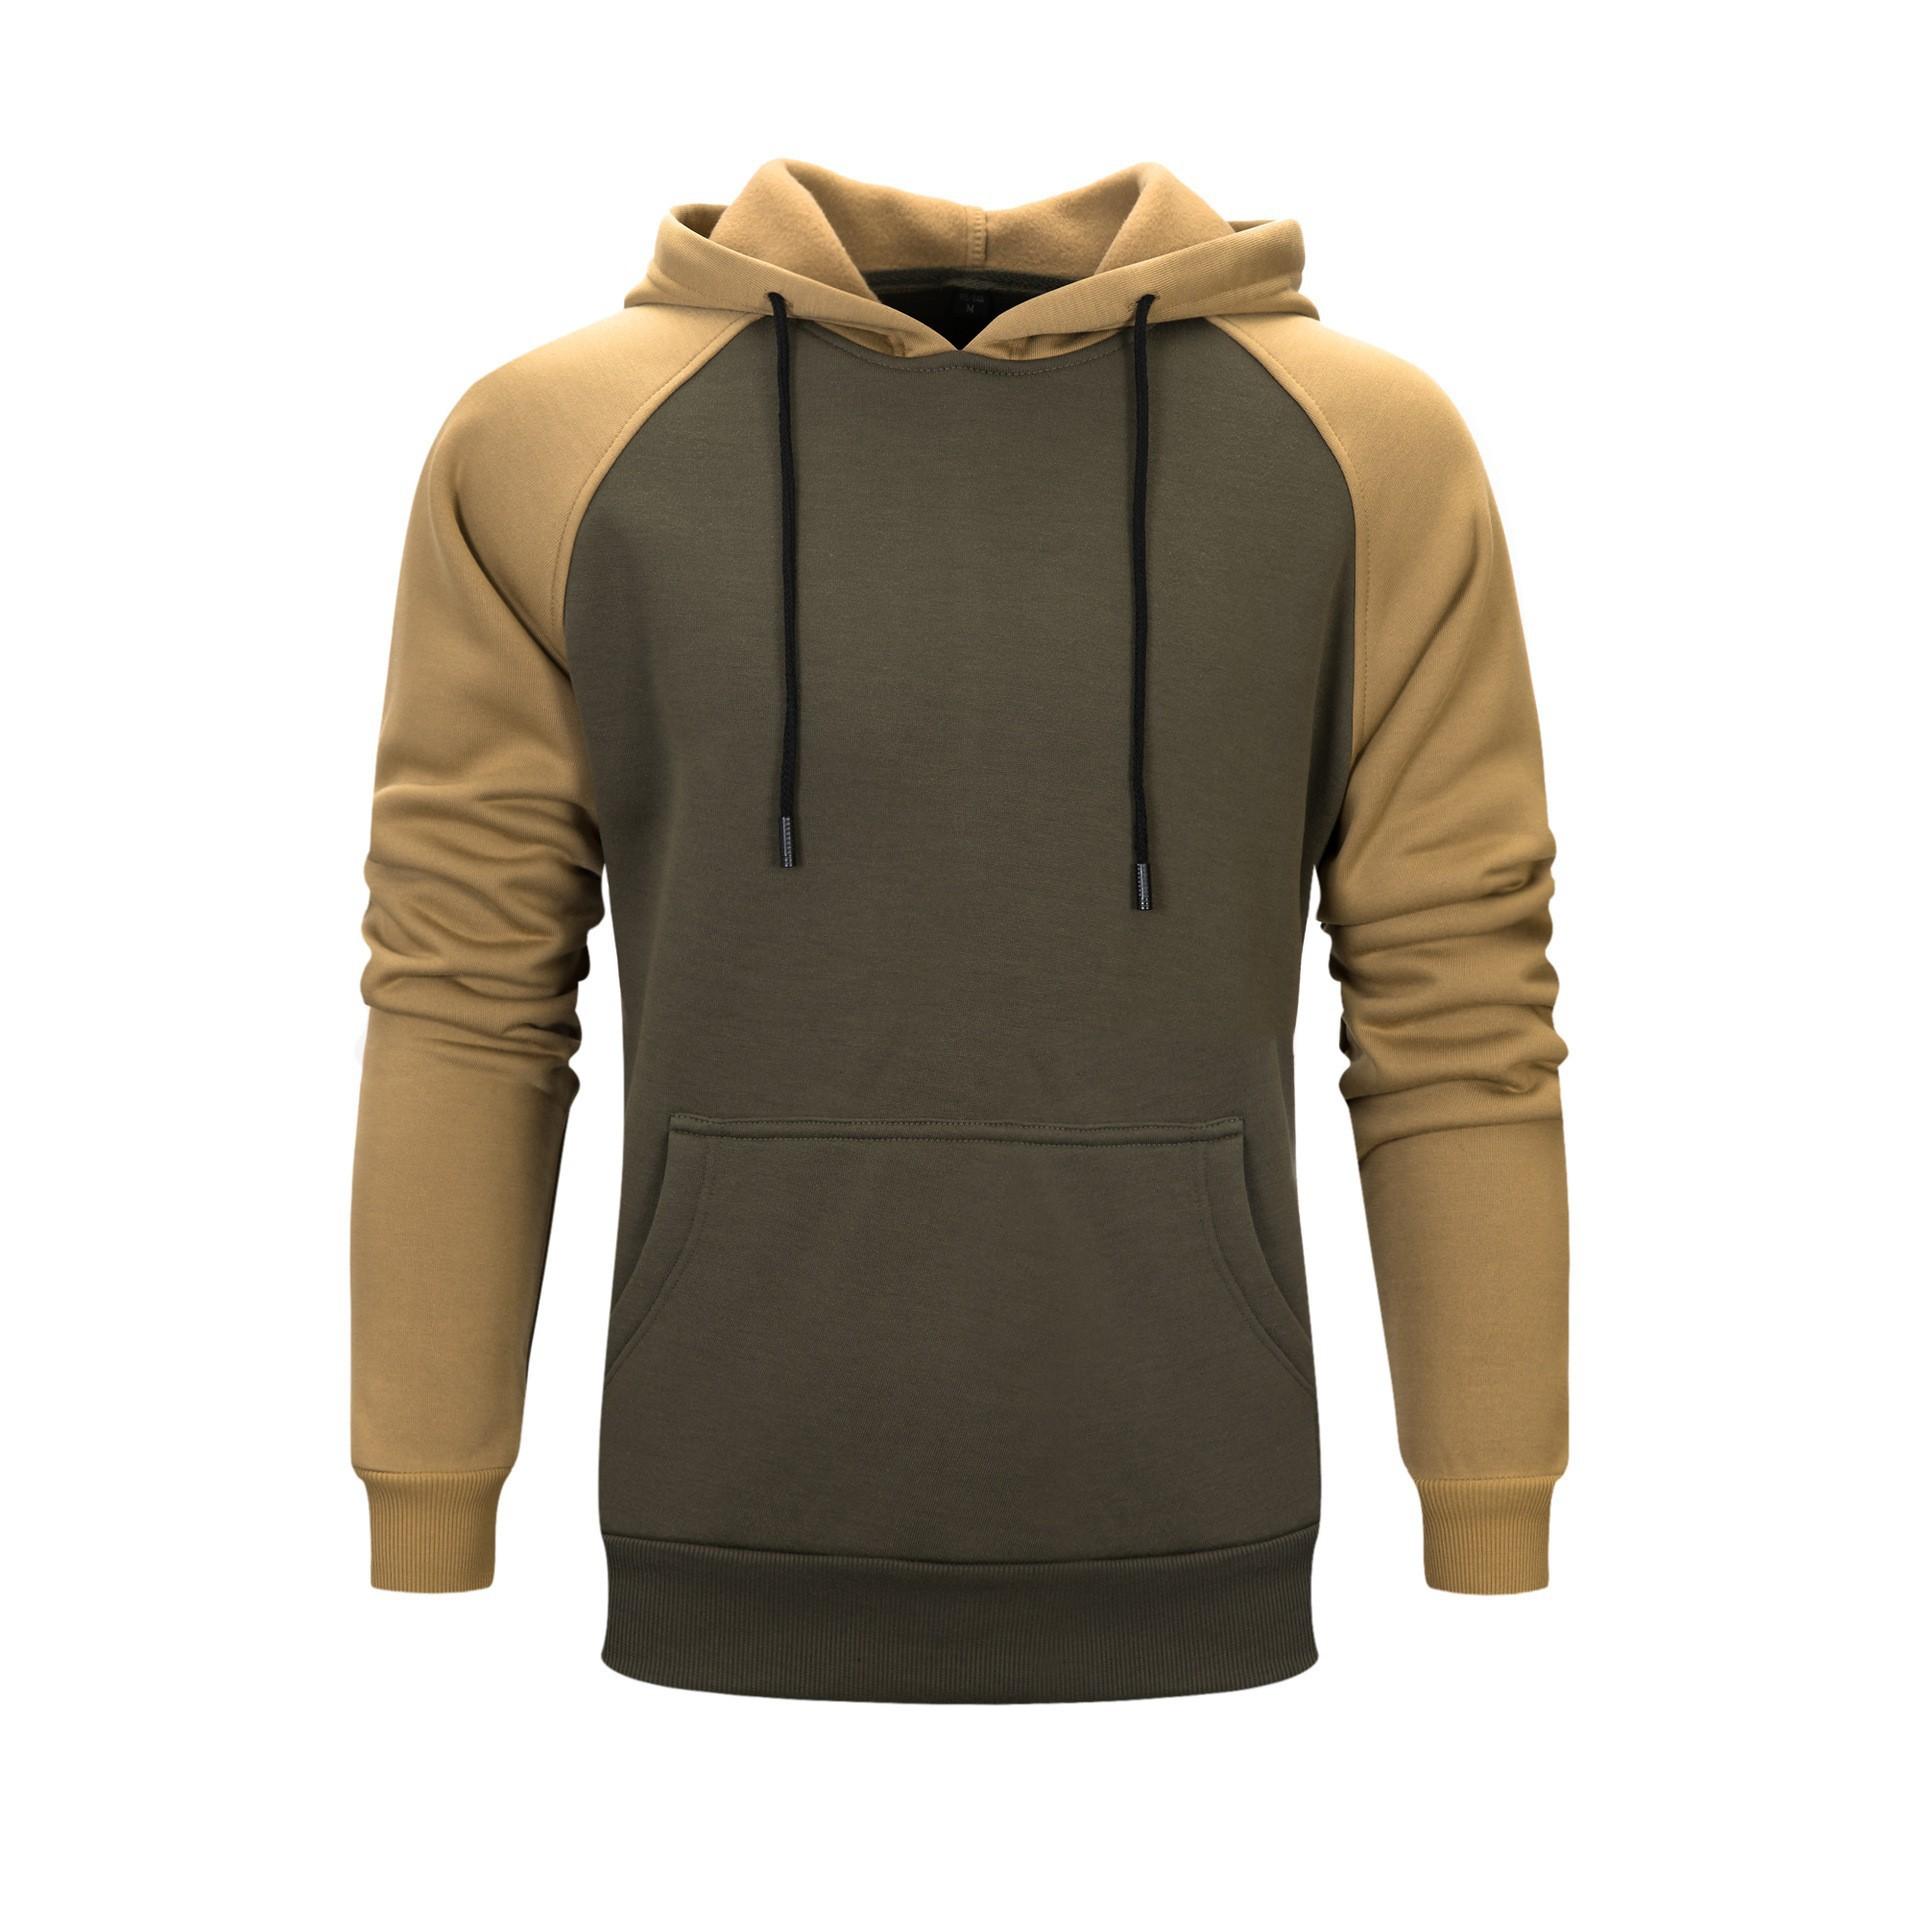 ForYourBeauty Sports Pullovers Fitness Men's Hoodies Autumn Winter Clothing Sleeve Patchwork Men Pullover